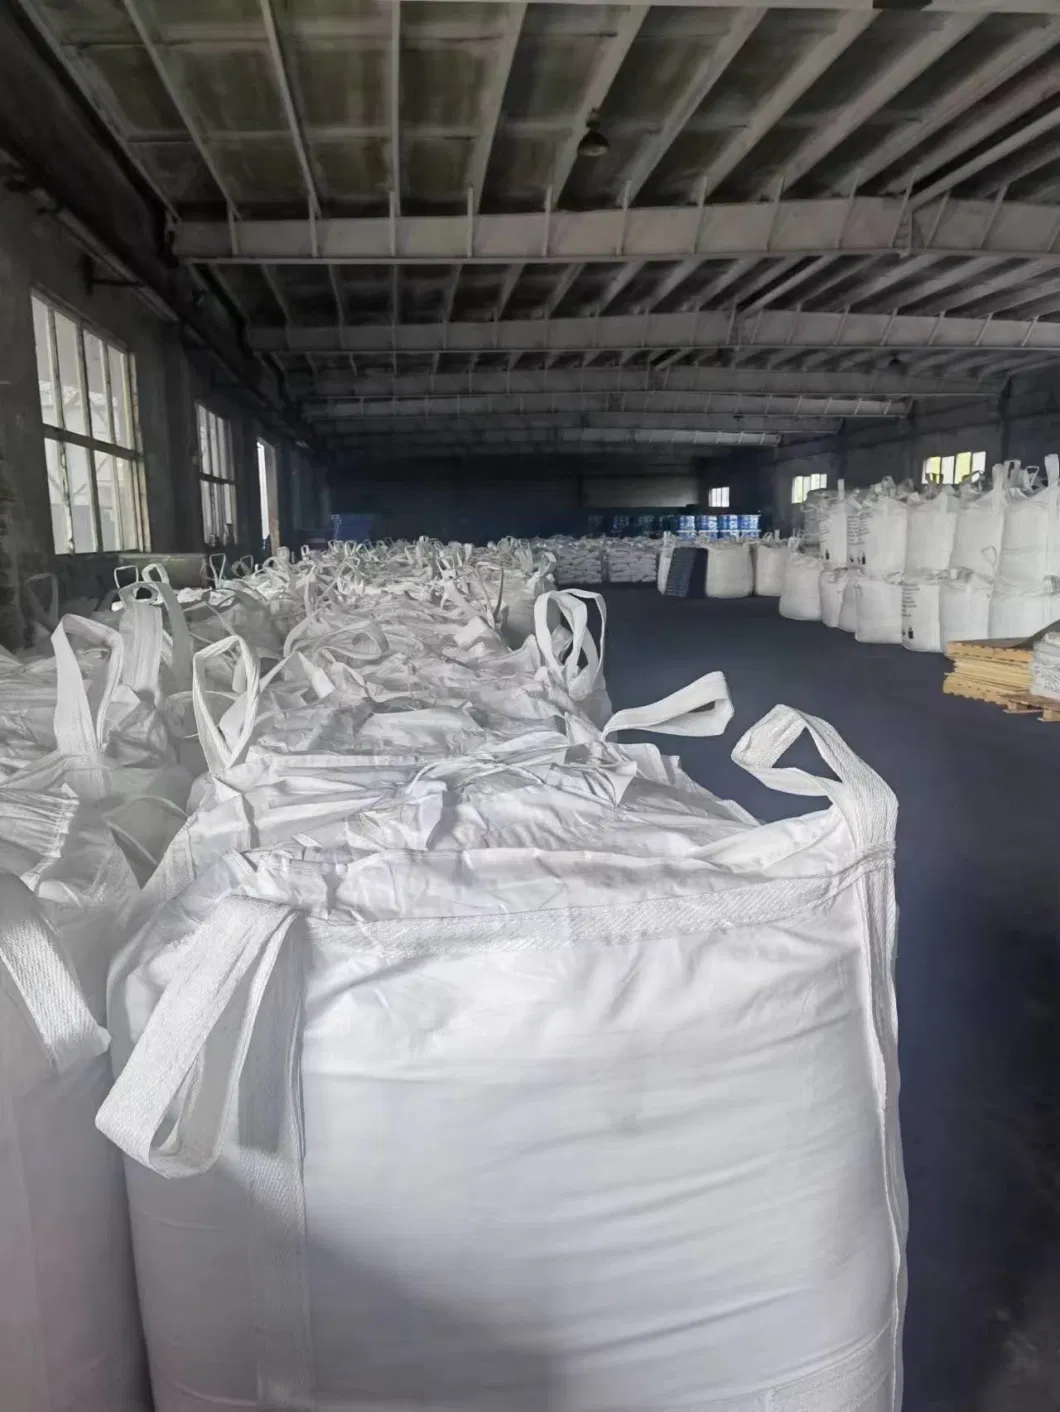 Food Grade Sodium Sulfite with 99% Purity CAS 7757-83-7